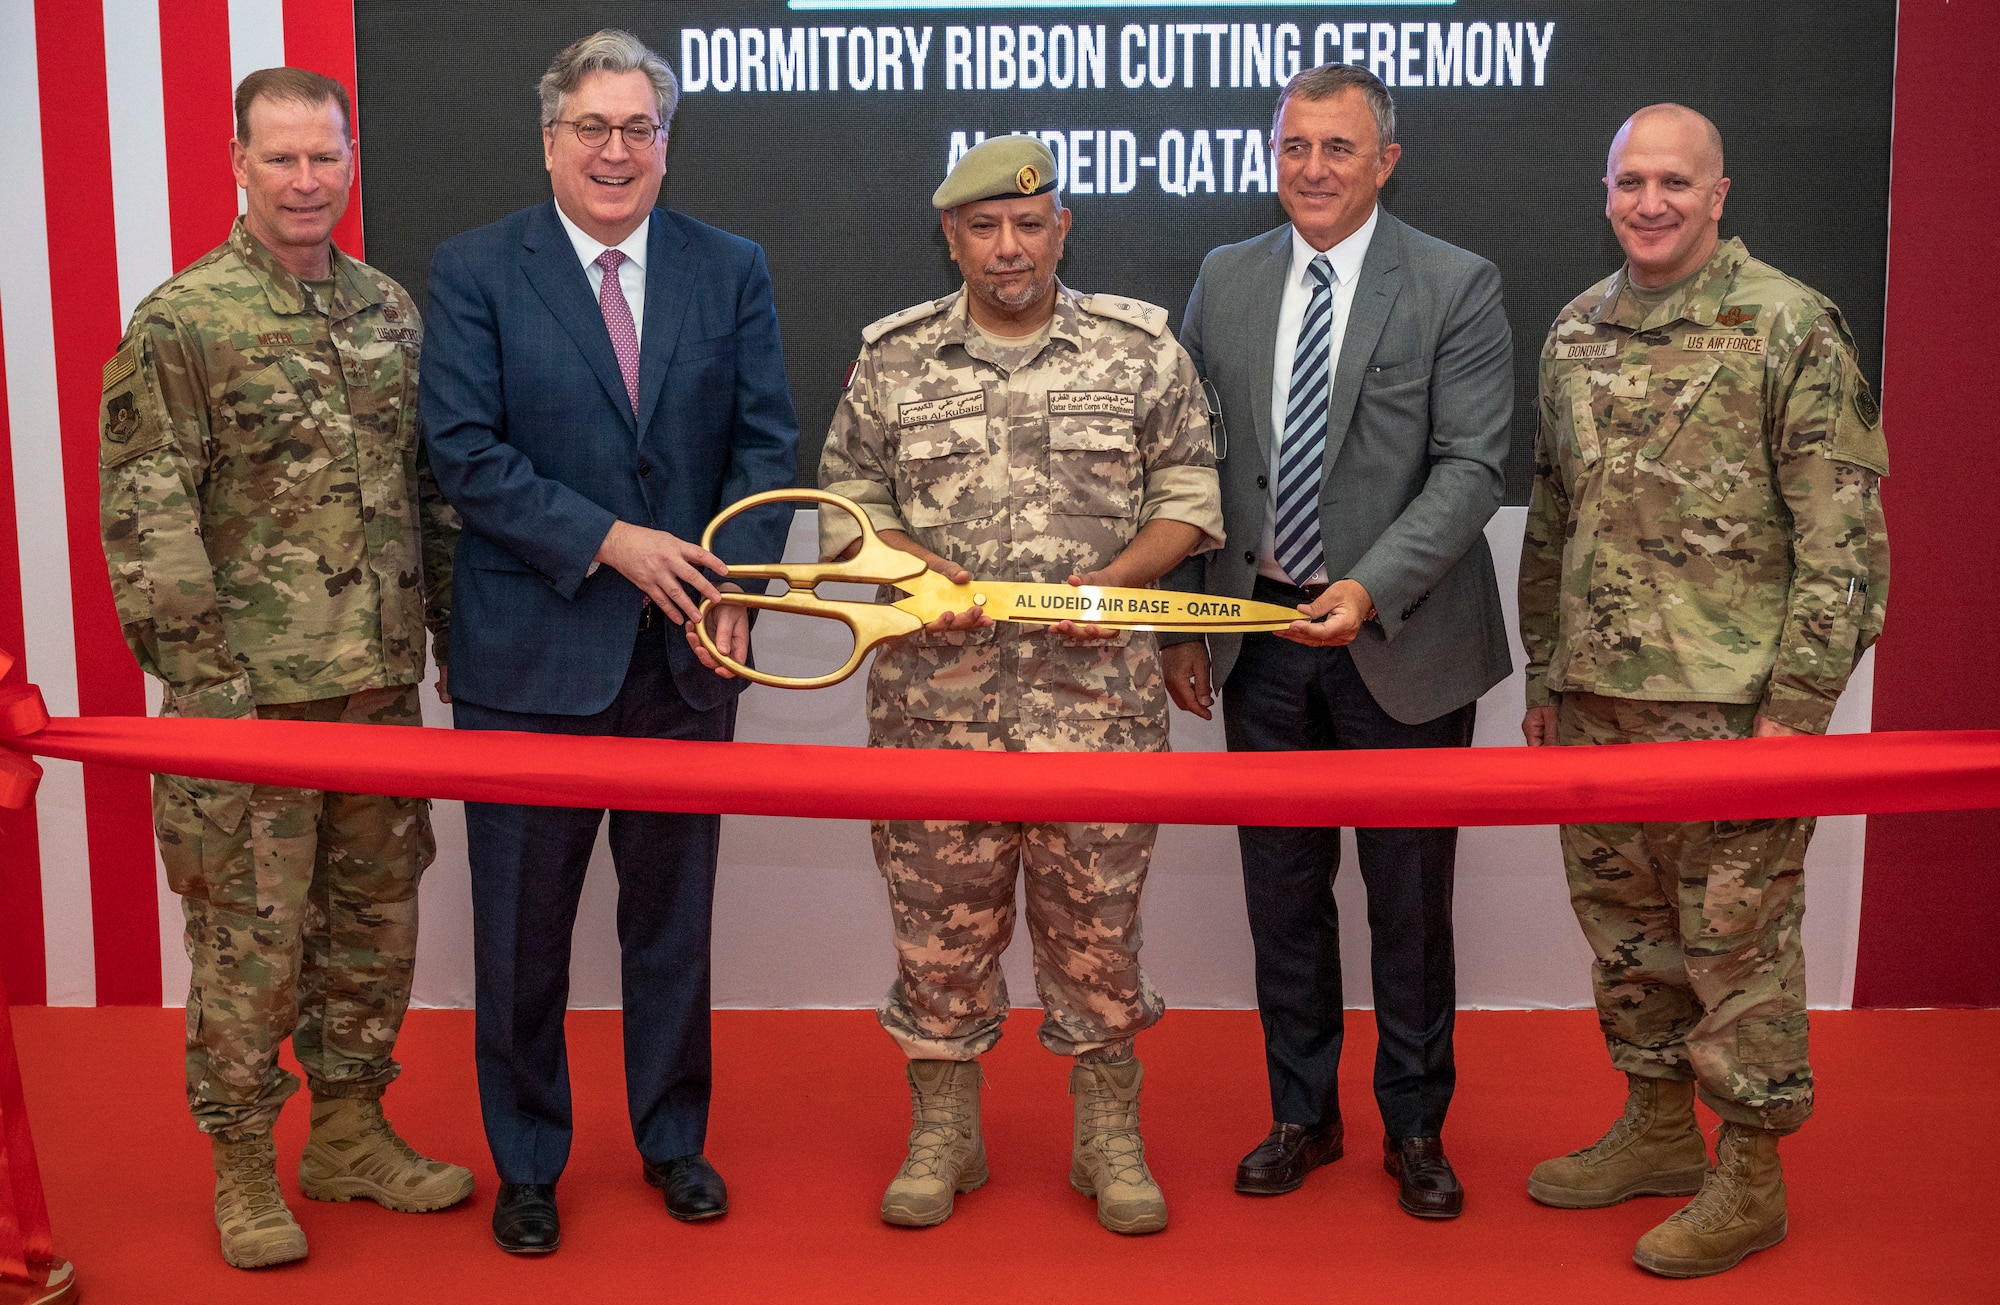 Distinguished guests from the U.S. Embassy in Qatar, Qatar Emiri Corps of Engineers, U.S. Air Forces Central and Bahadir Construction Engineering Contracting and Trading Company pose for a photo during the ribbon cutting ceremony for the new Blatchford-Preston Complex dormitories Aug. 3, 2021, at Al Udeid Air Base, Qatar.